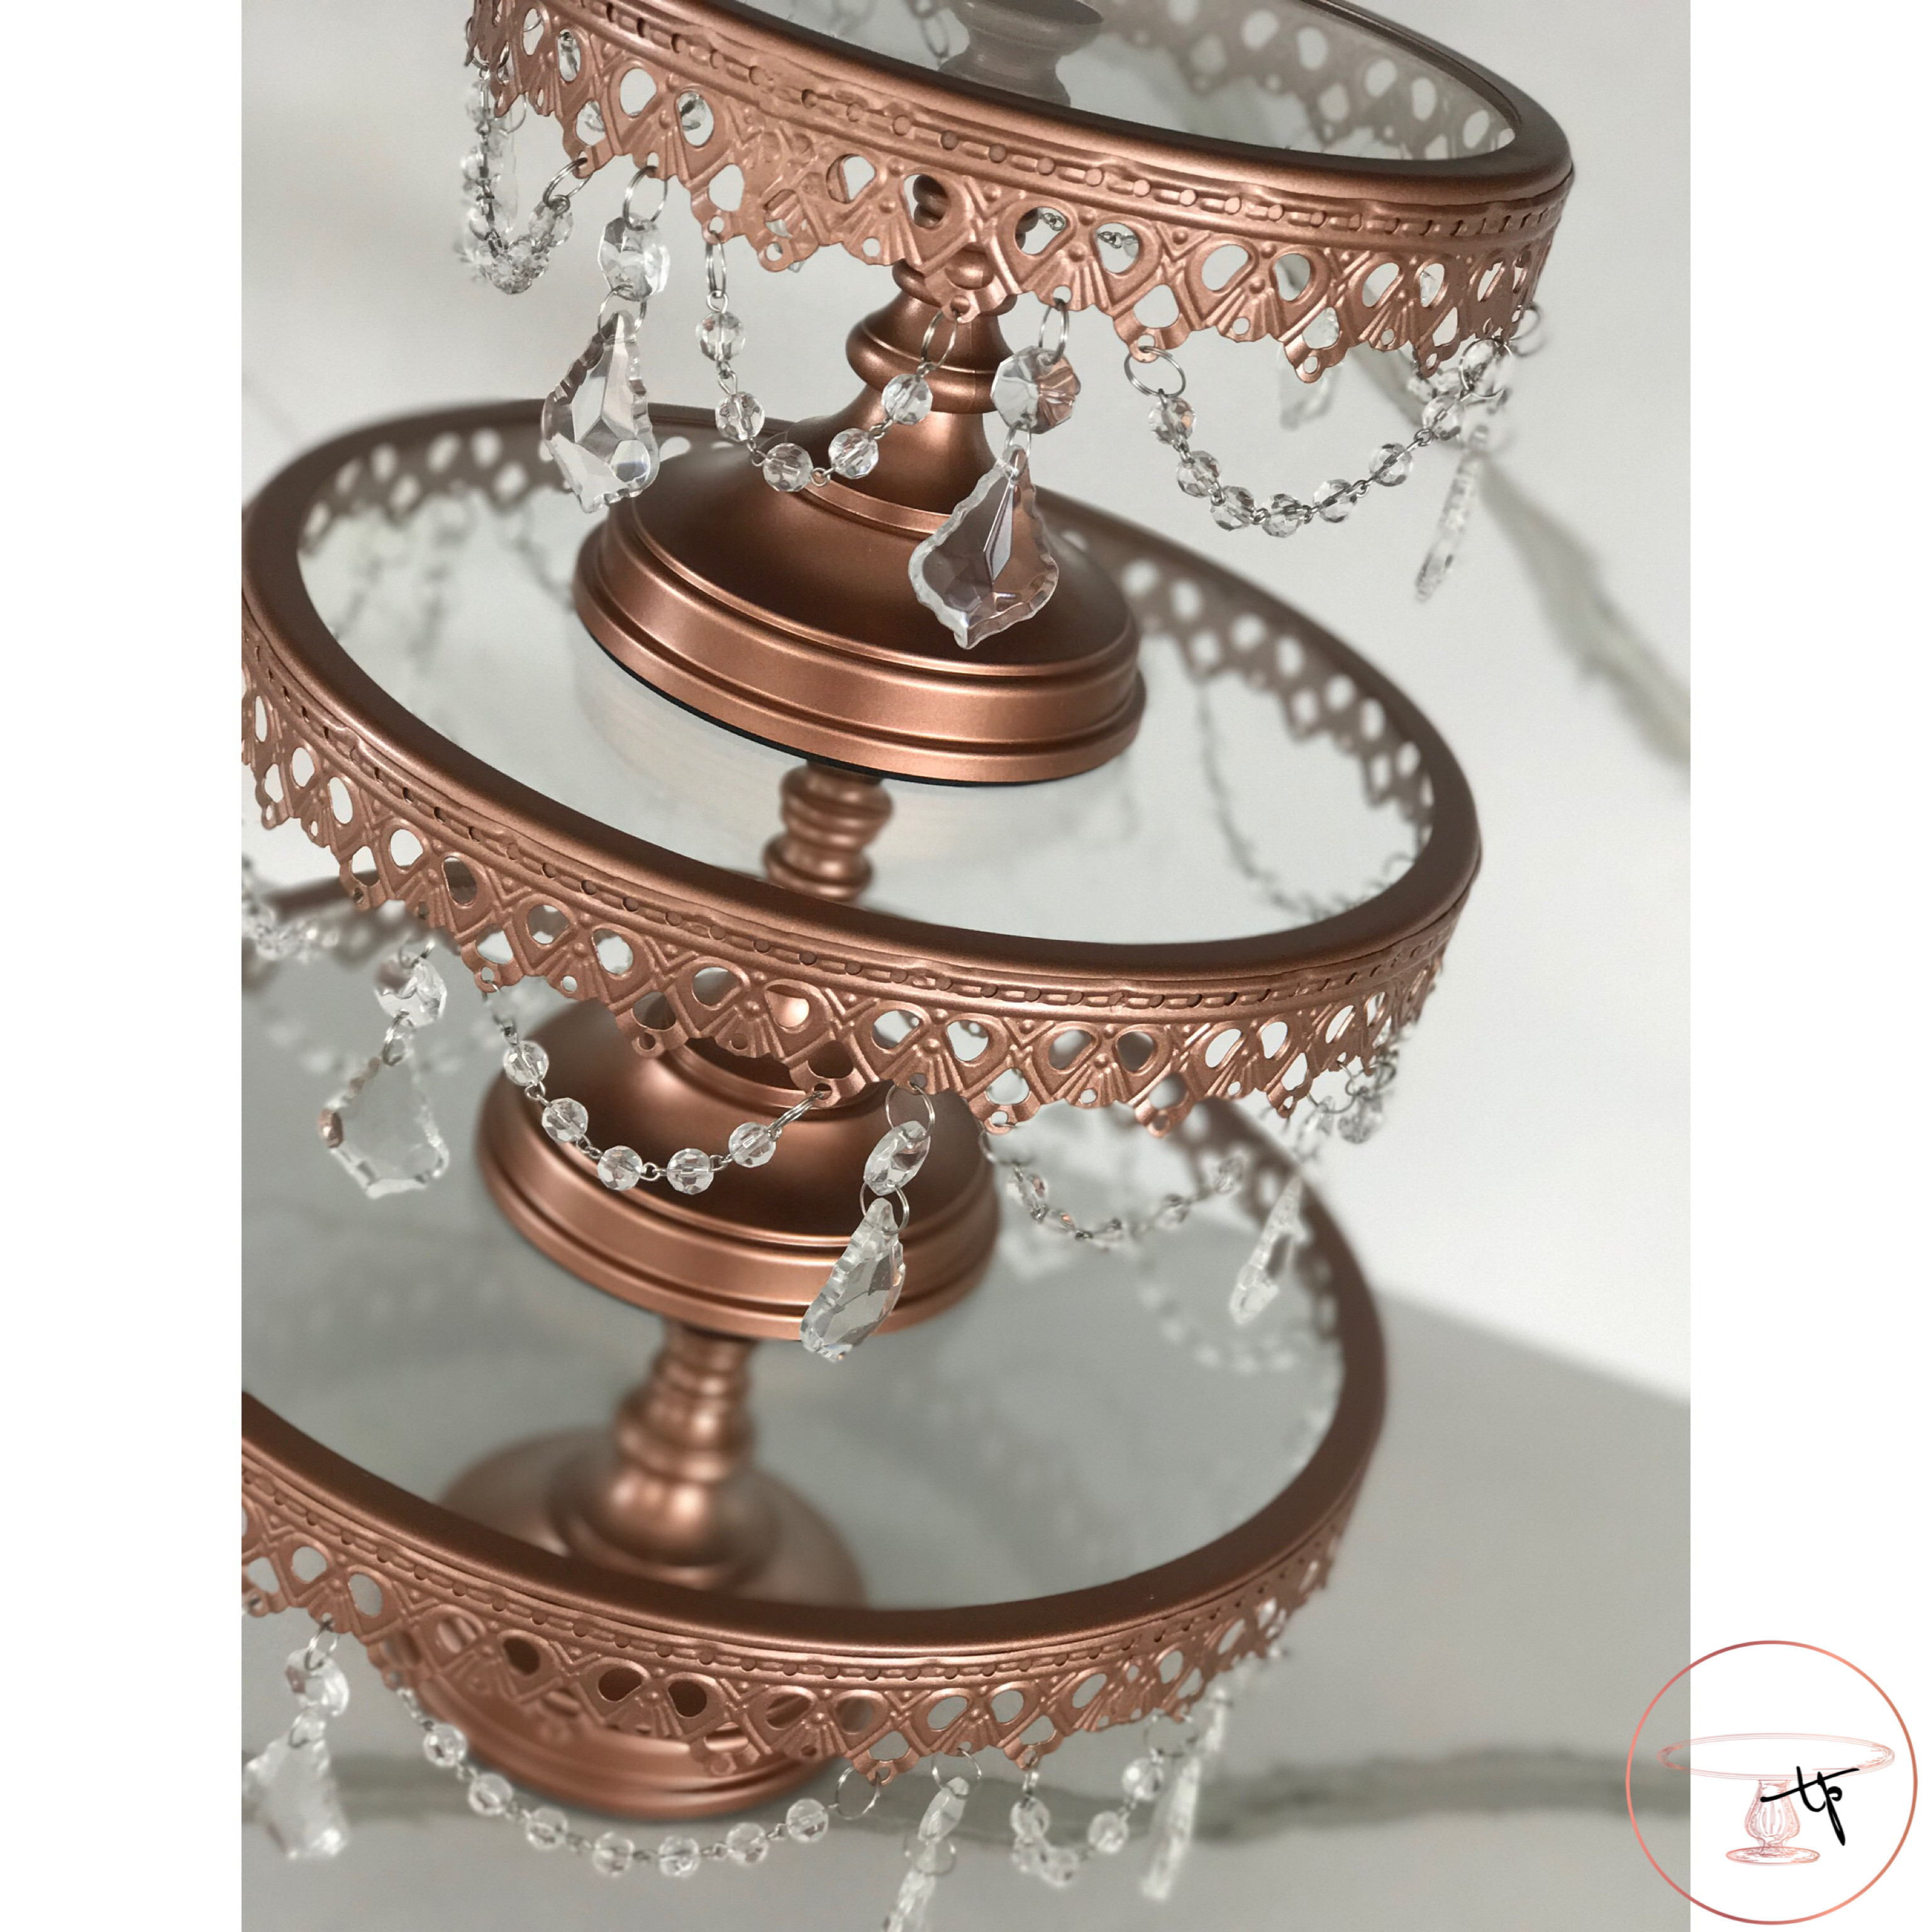 10 Awesome Rose Gold Pedestal Vase 2024 free download rose gold pedestal vase of rose gold victoria glass top pedestals available for hire the pertaining to rose gold victoria glass top pedestals available for hire the pedestal